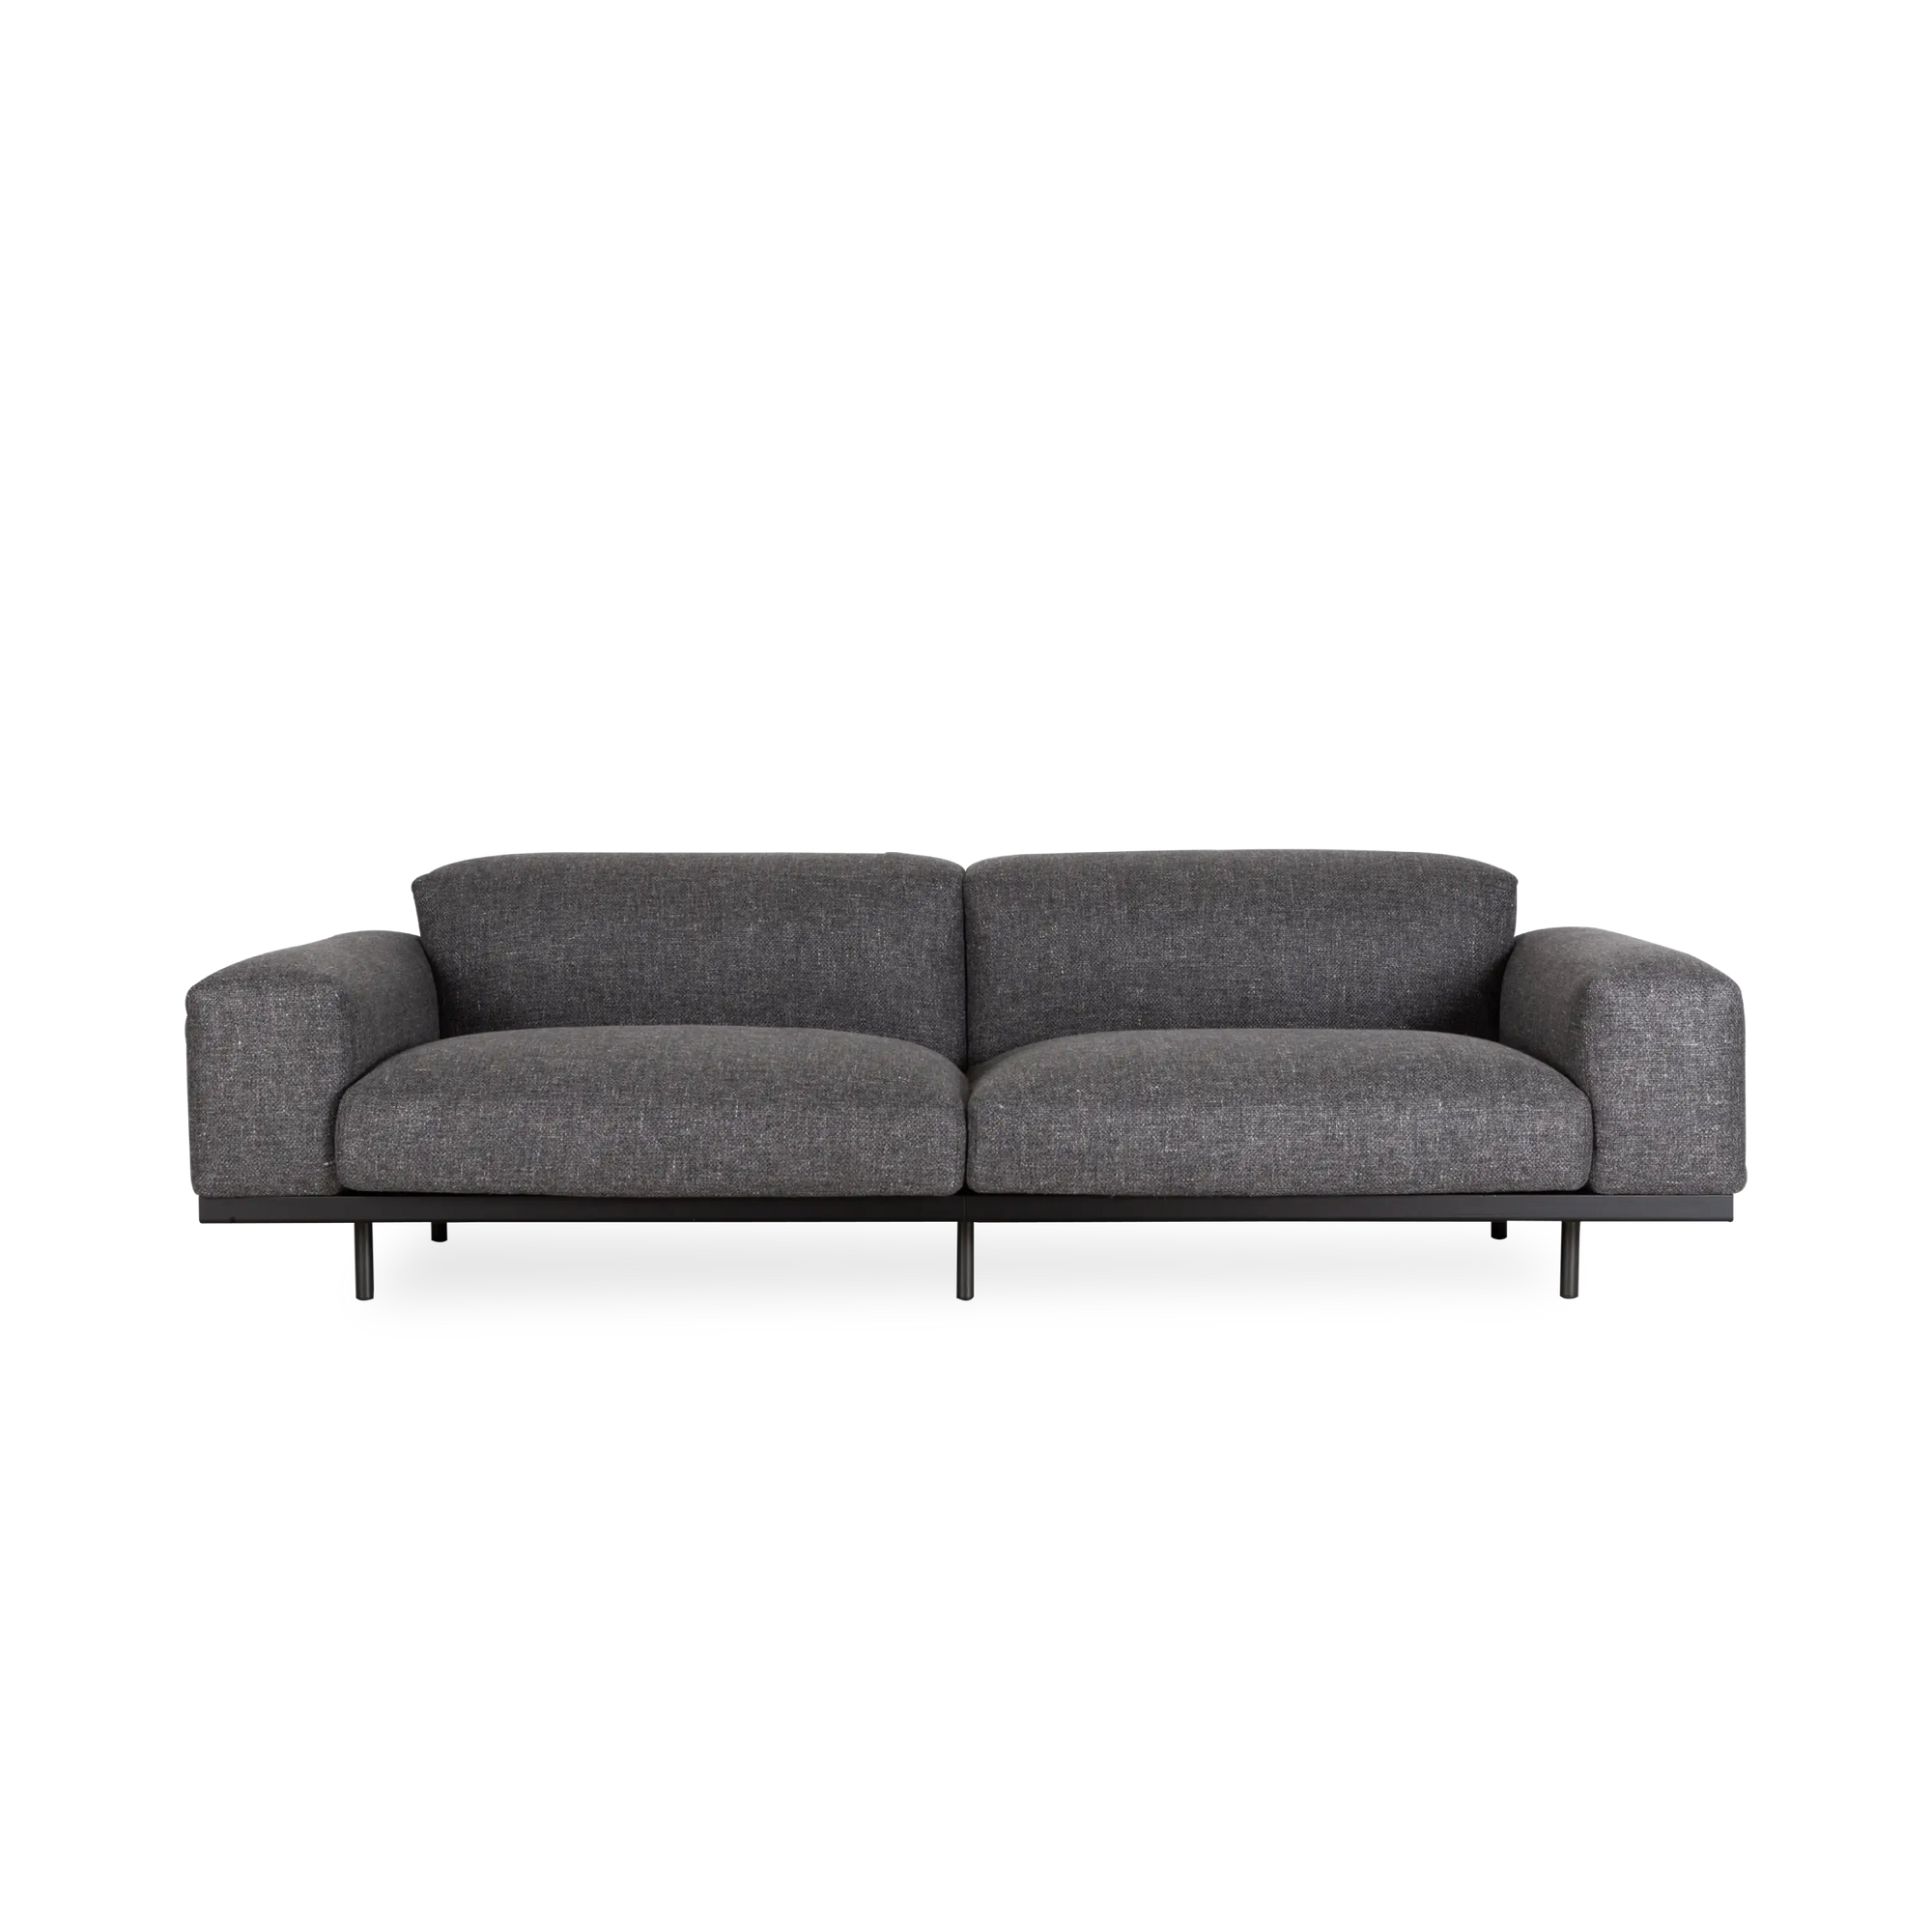 Displaying a pleasing and inviting aesthetic, the Naviglio Sofa is a masterpiece of generous proportions and soft, yet distinctly architectural geometry.